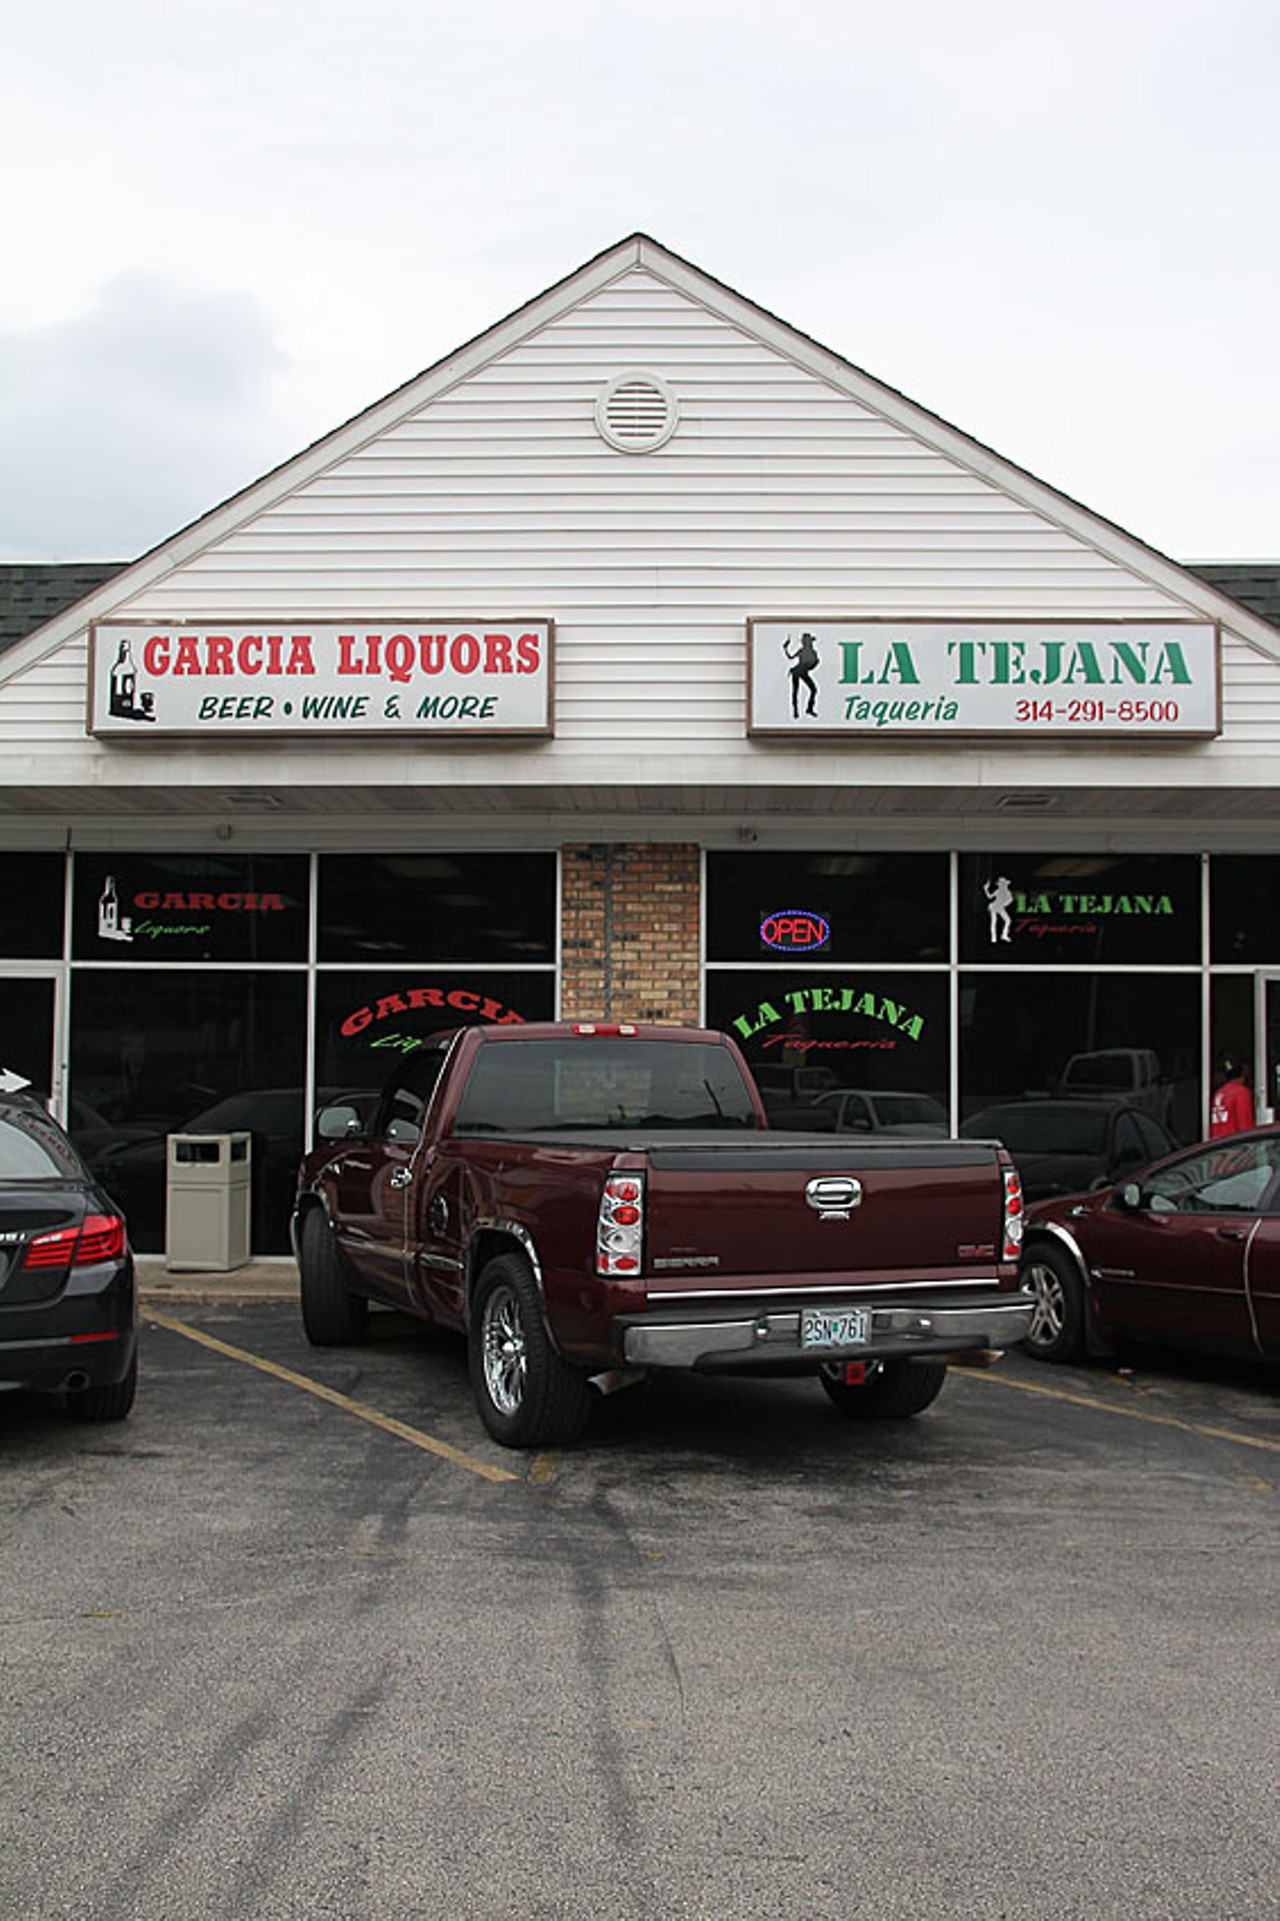 La Tejana Taqueria
(3149 North Lindbergh Boulevard, Maryland Heights; 314-291-8500)
If you've ever dreamed of a liquor store that serves tacos, you're in luck. The menu at Le Tejana is handwritten and taped to the wall: tacos, tortas and a few platters with meat, rice and refried beans, all made to perfection. Try the tacos campechanos, a mixture of steak and chorizo, or the simple but classic tacos al pastor. On the weekends, La Tejana prepares heavenly carnitas: crisp on the outside, tender inside and outrageously flavorful. Goat soup is another staple -- the flavor is rich and unmistakably, well, goaty as well as spicy, even a spoonful of the broth, minus any of the tender meat that swims in it, has quite the punch. Plus, as mentioned, you're in a liquor store...doesn't get much more convenient than that.